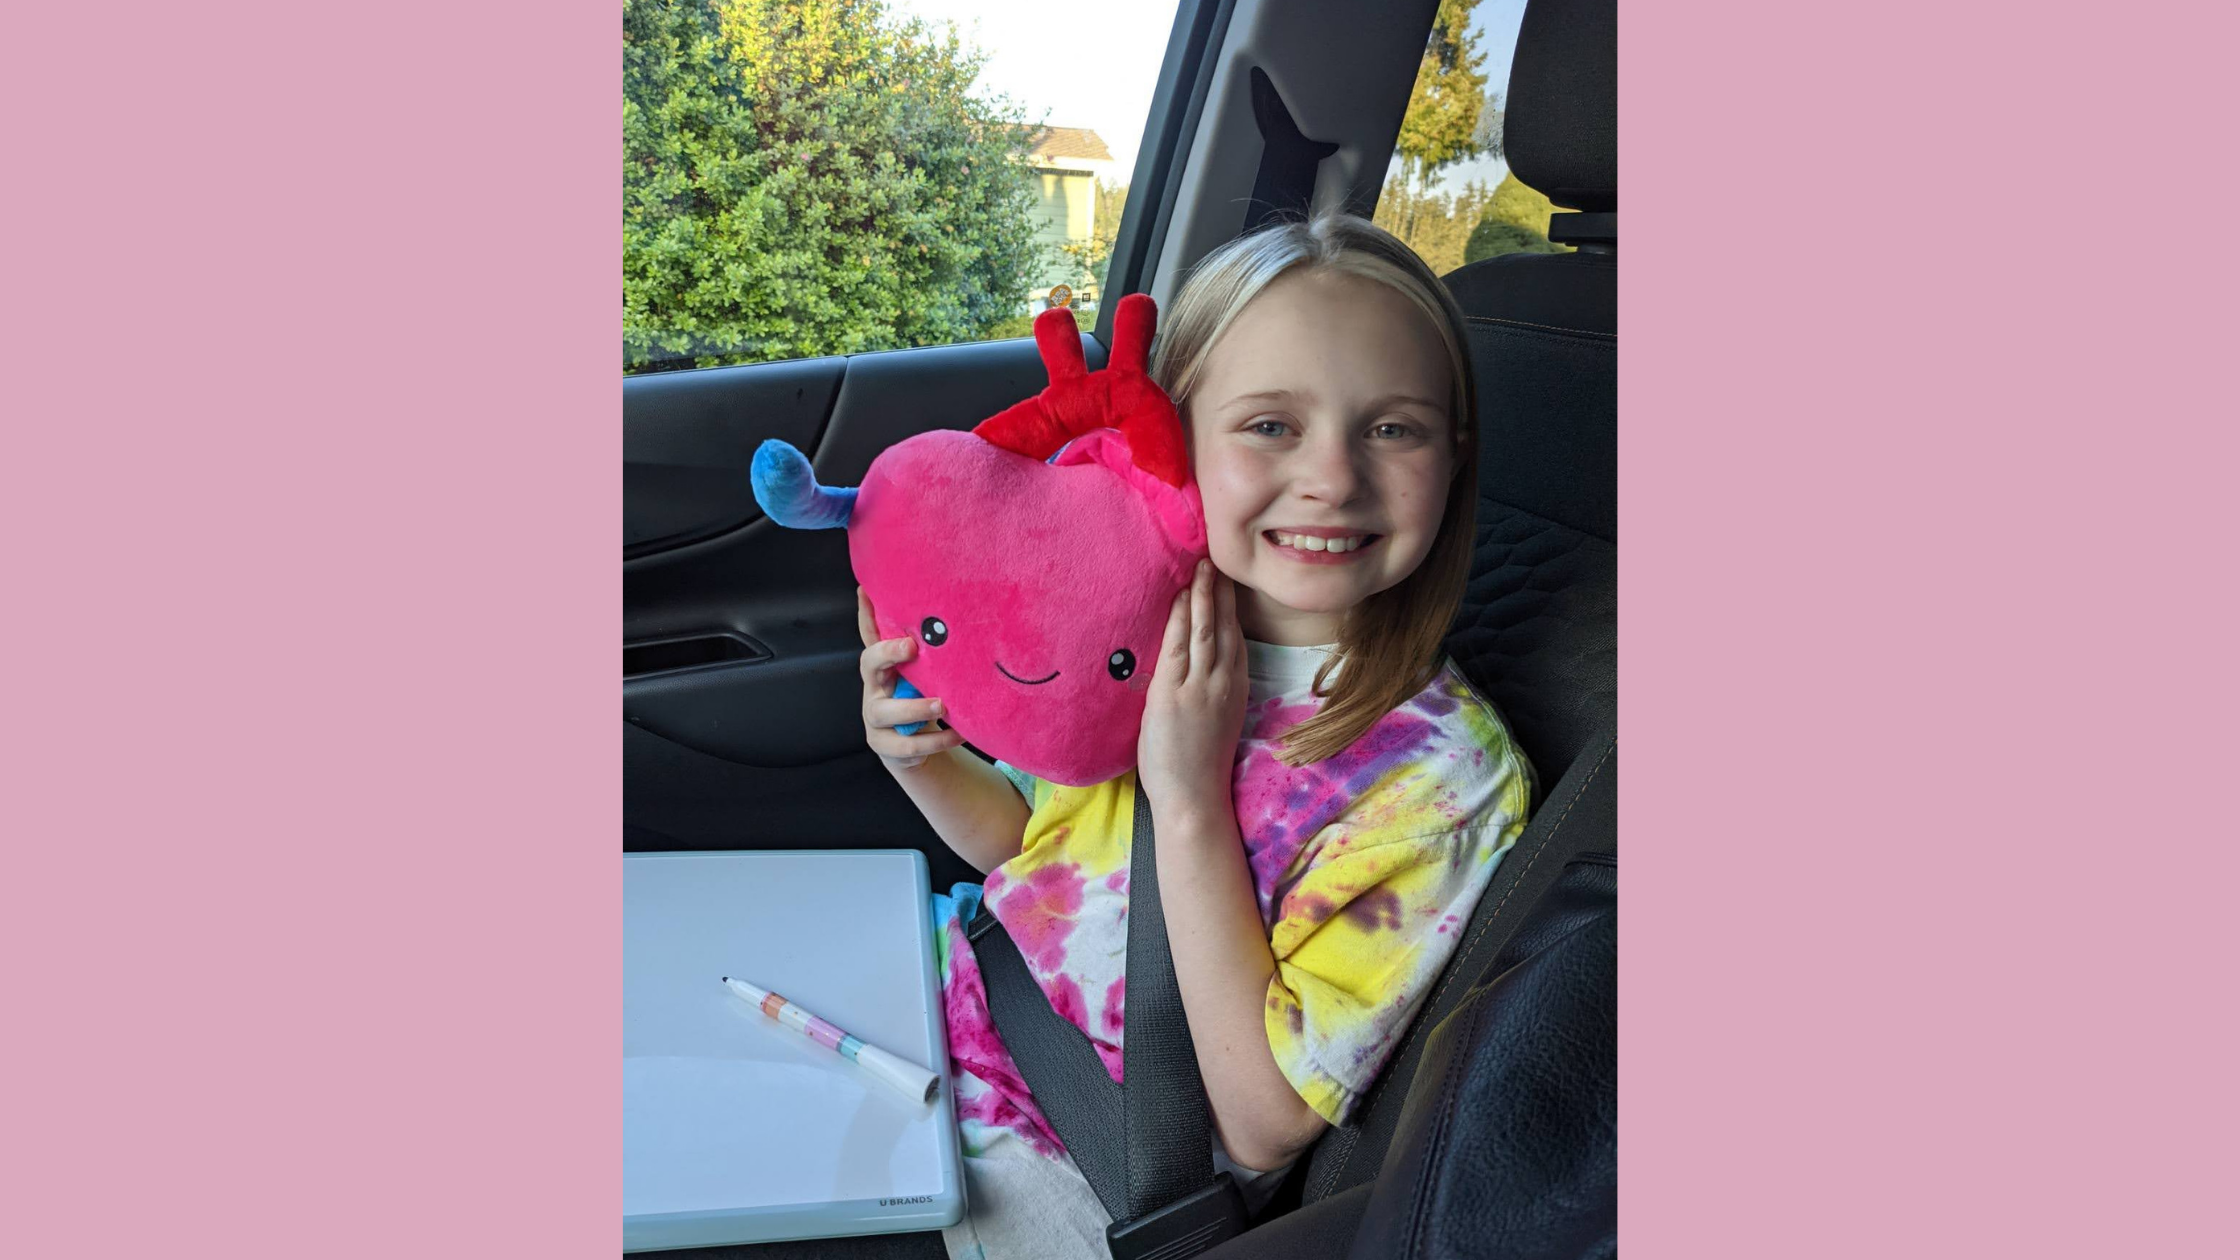 Sitting in a car, a young blonde girl smiles as she holds a stuffed heart up to her cheek.